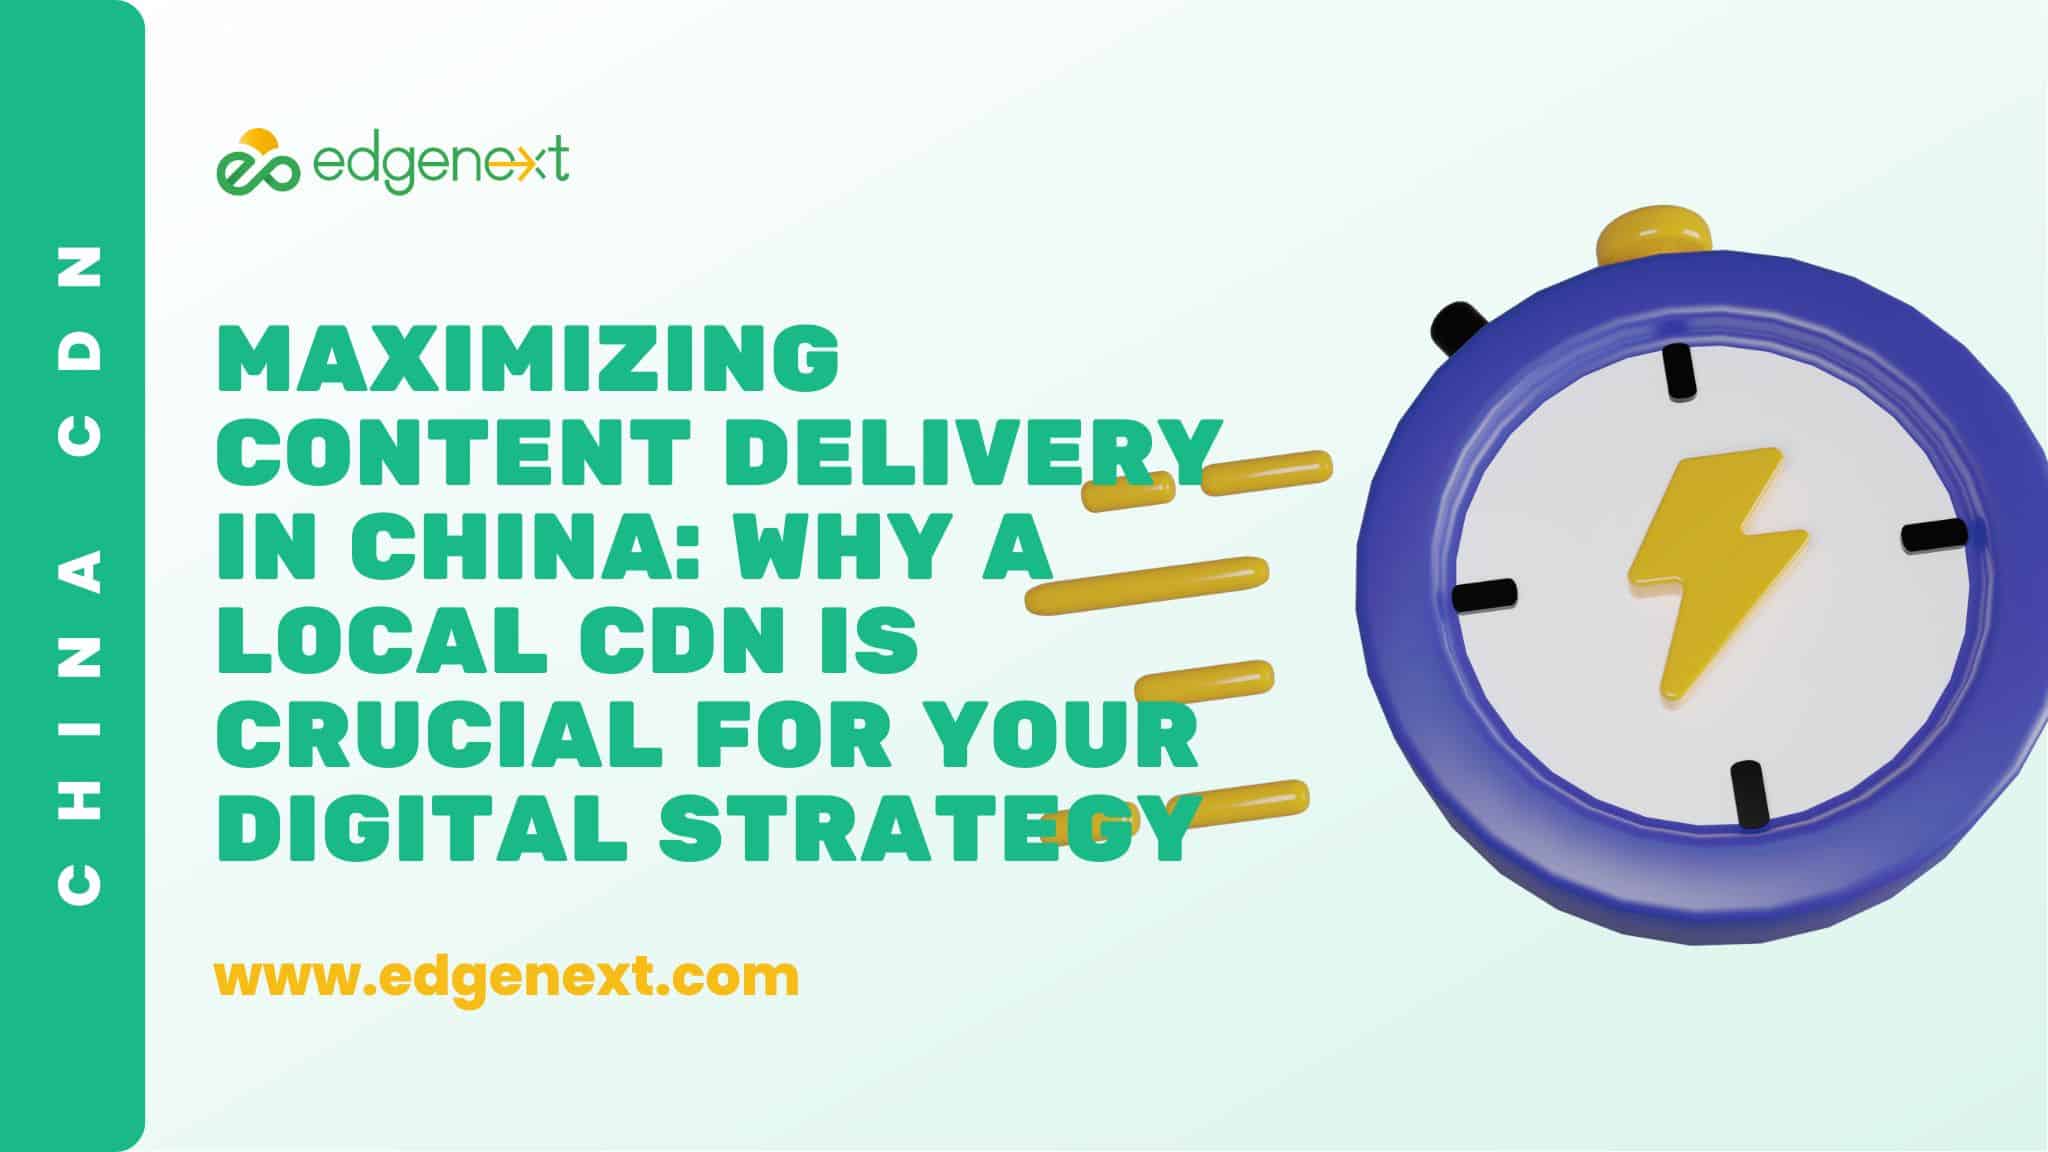 Maximizing Content Delivery in China: Why a Local CDN is Crucial for Your Digital Strategy